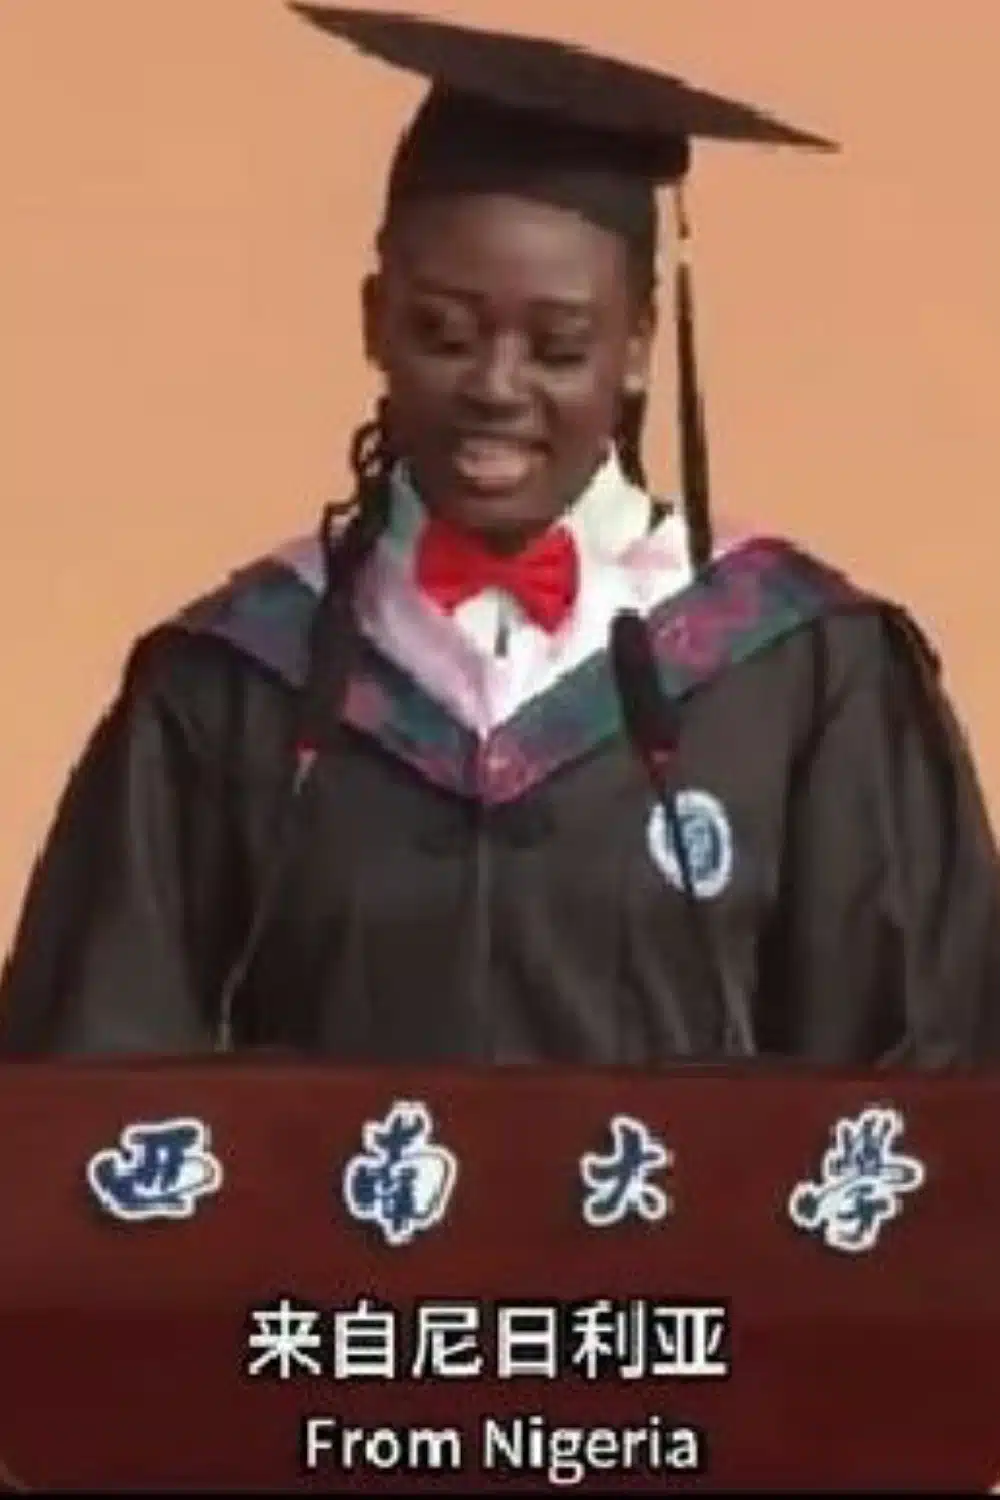 Nigerian lady emerges as best graduating student in China, showcases fluent Chinese skills on graduation day